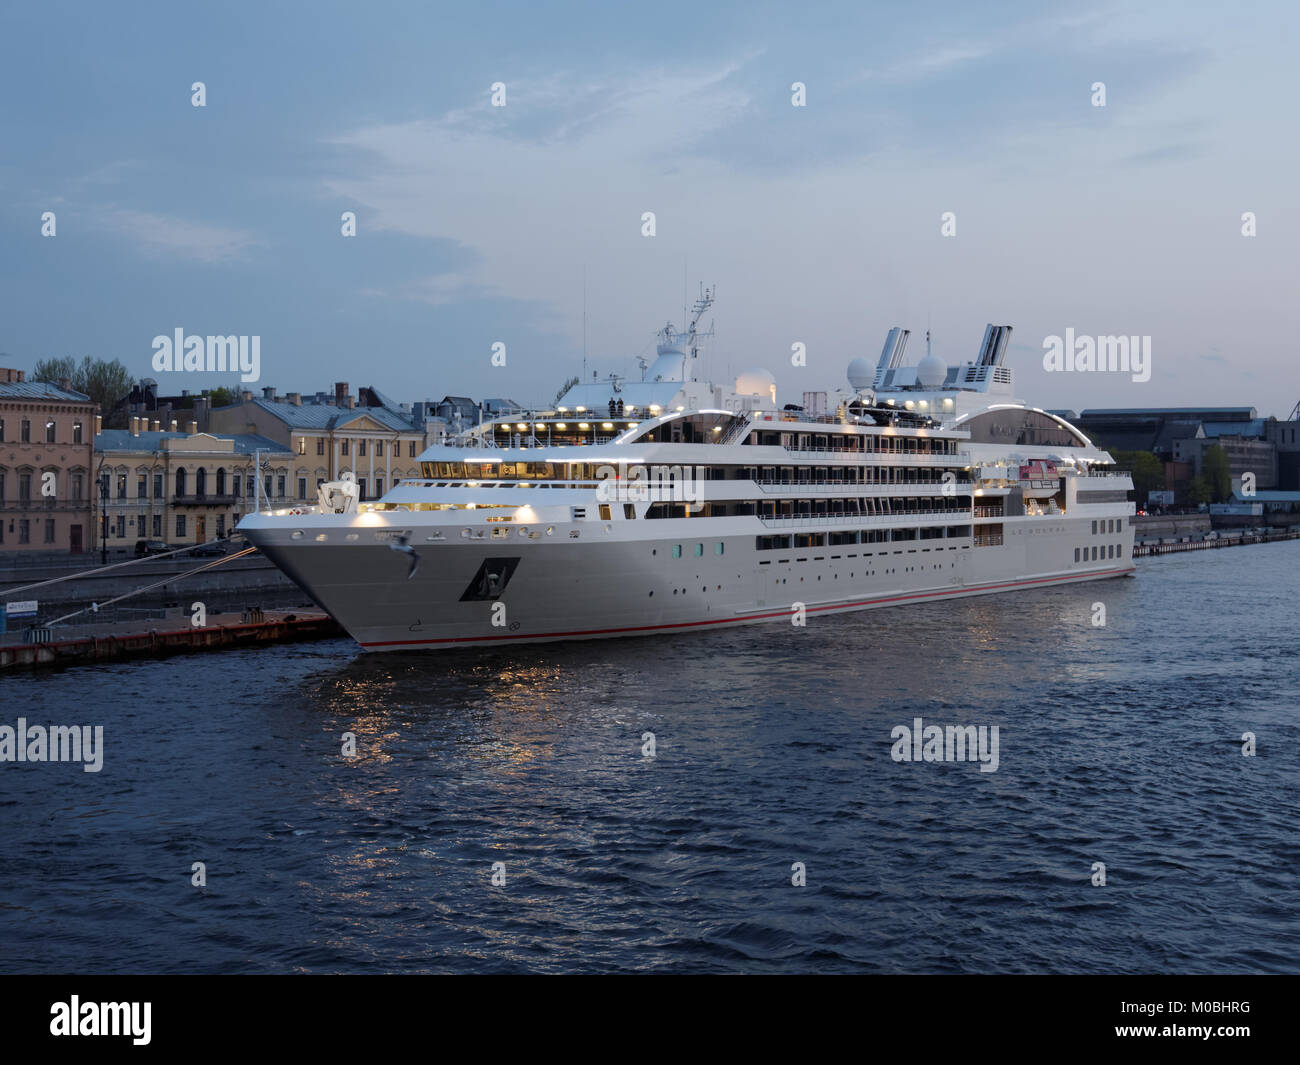 St. Petersburg, Russia - May 19, 2017: Cruise liner Le Soleal moored at English embankment. Designed in 2013, the ship owned by PONANT has only 132 st Stock Photo